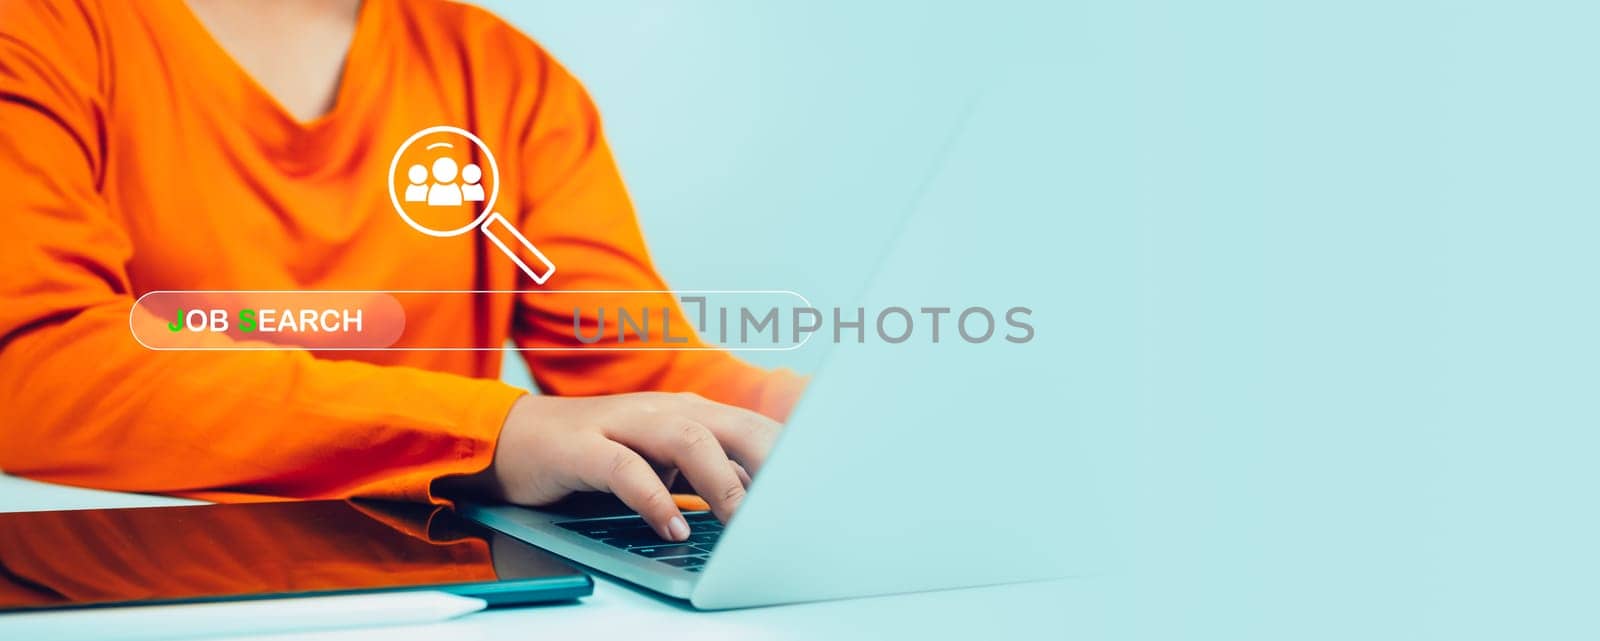 Human using computer laptop to job search on online internet, applying for a job concept, job search concept, find your career, recruitment concept. by Unimages2527